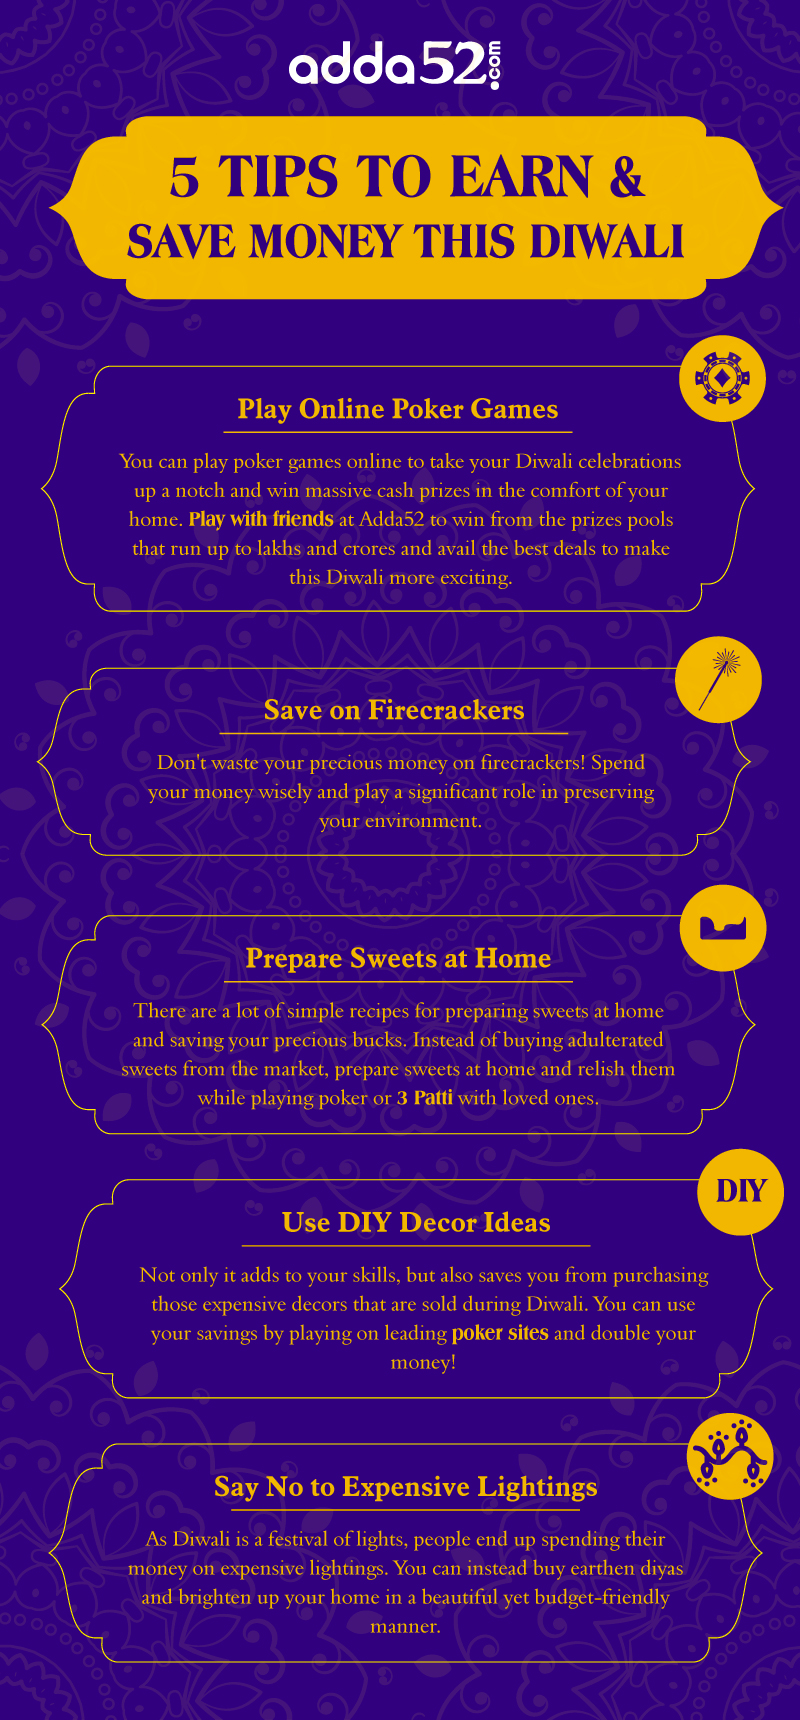 5 Tips to Earn & Save Money This Diwali